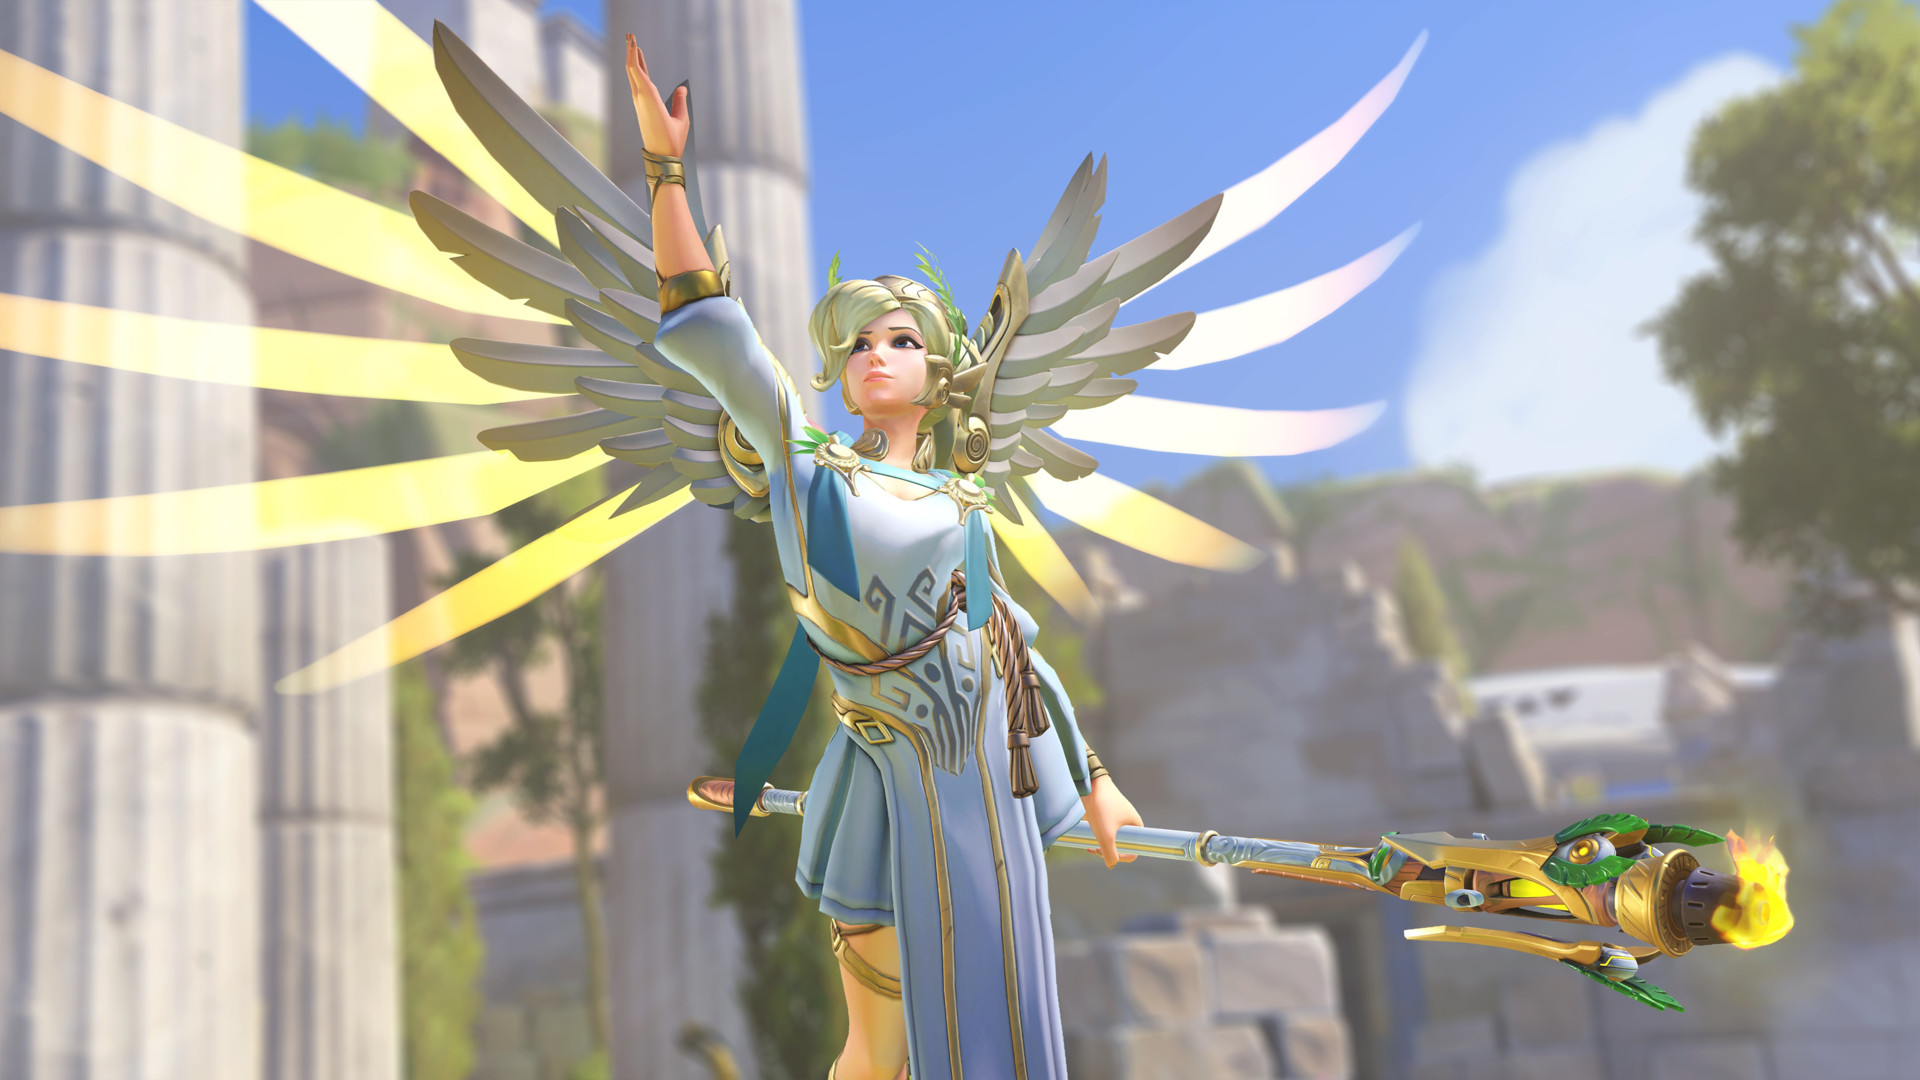 OVERWATCH - Mercy 'Winged Victory' Weapon Skin.